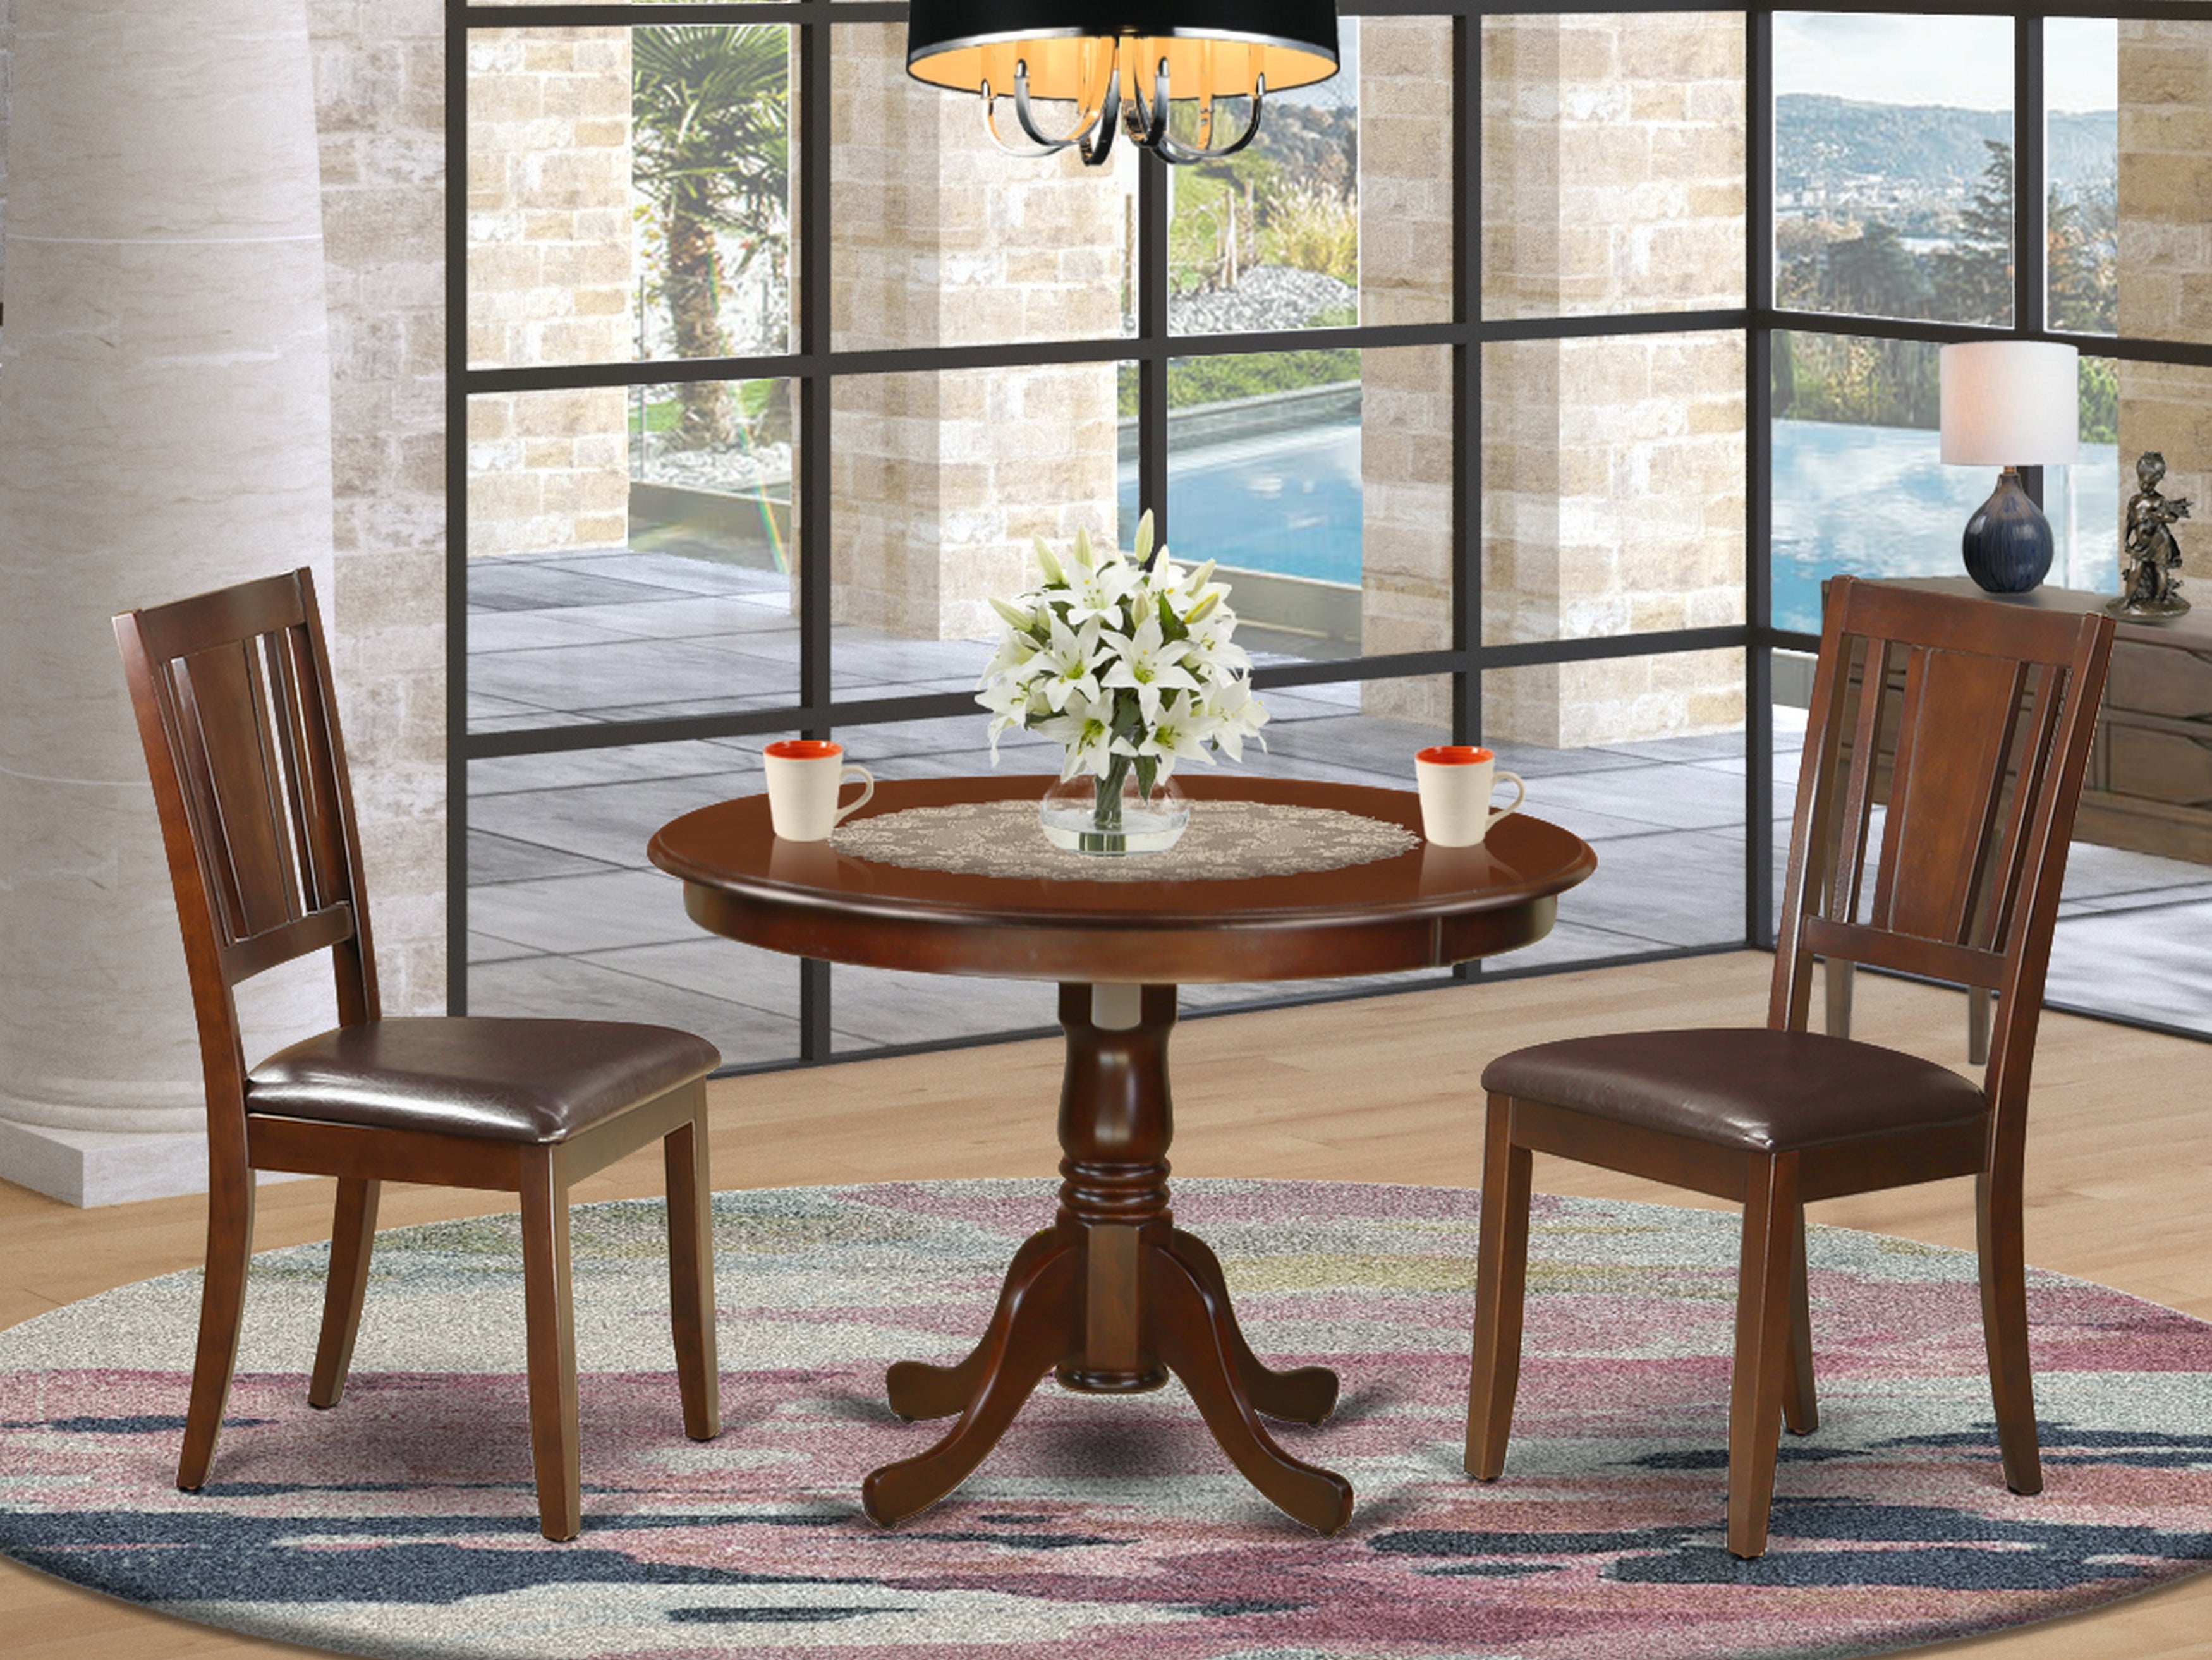 HLDU3-MAH-LC 3 Pc set with a Round Kitchen Table and 2 Leather Dinette Chairs in Mahogany